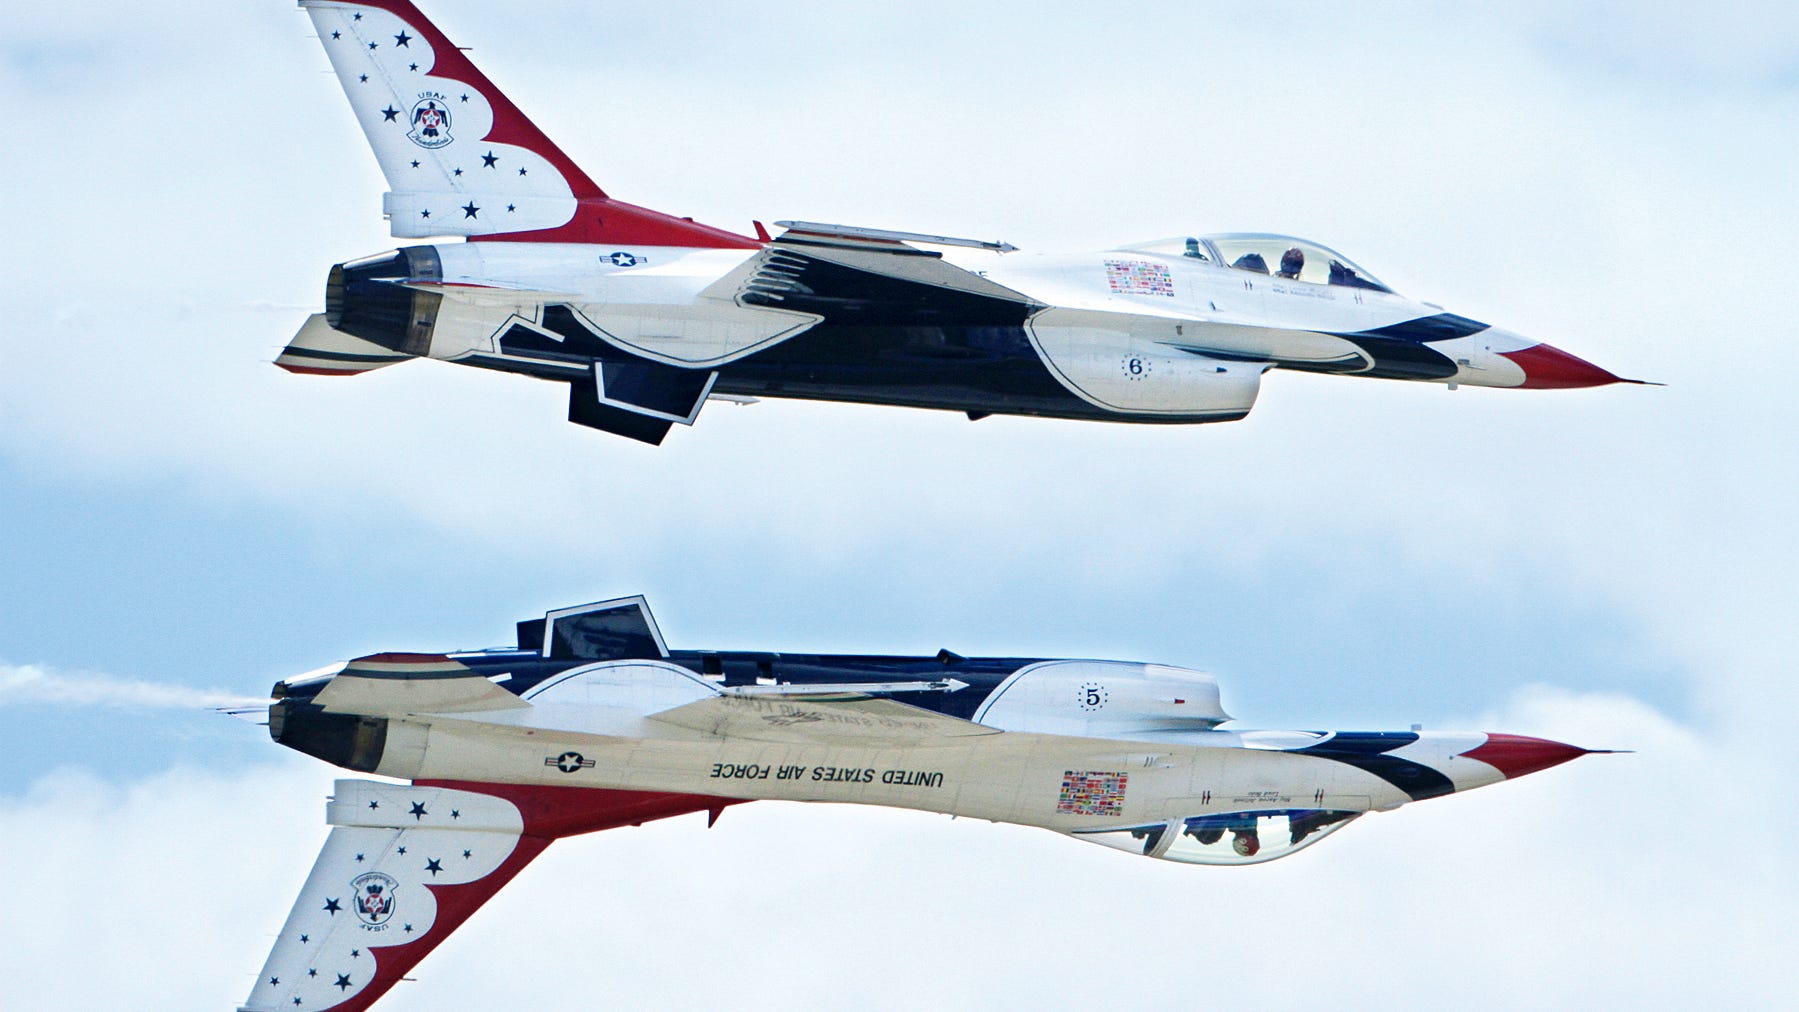 Air Force's Thunderbirds air show on in 2021 at Pease in Portsmouth NH